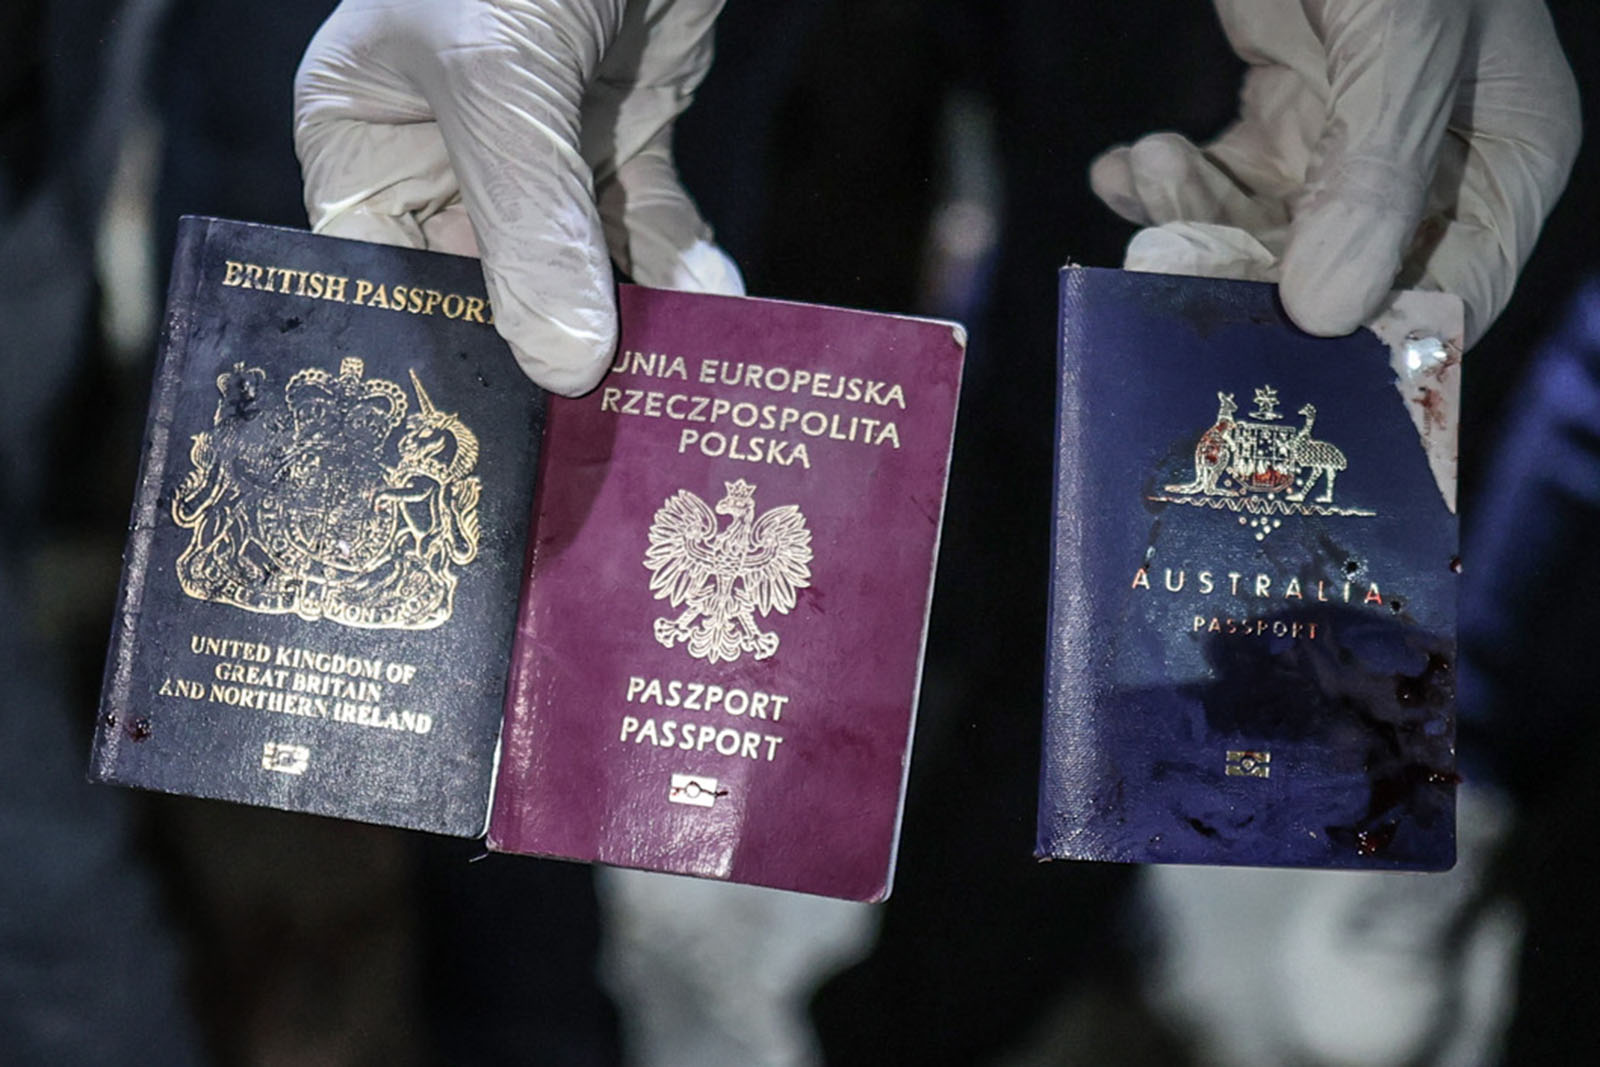 The passports of three deceased foreign aid workers are held up to camera.